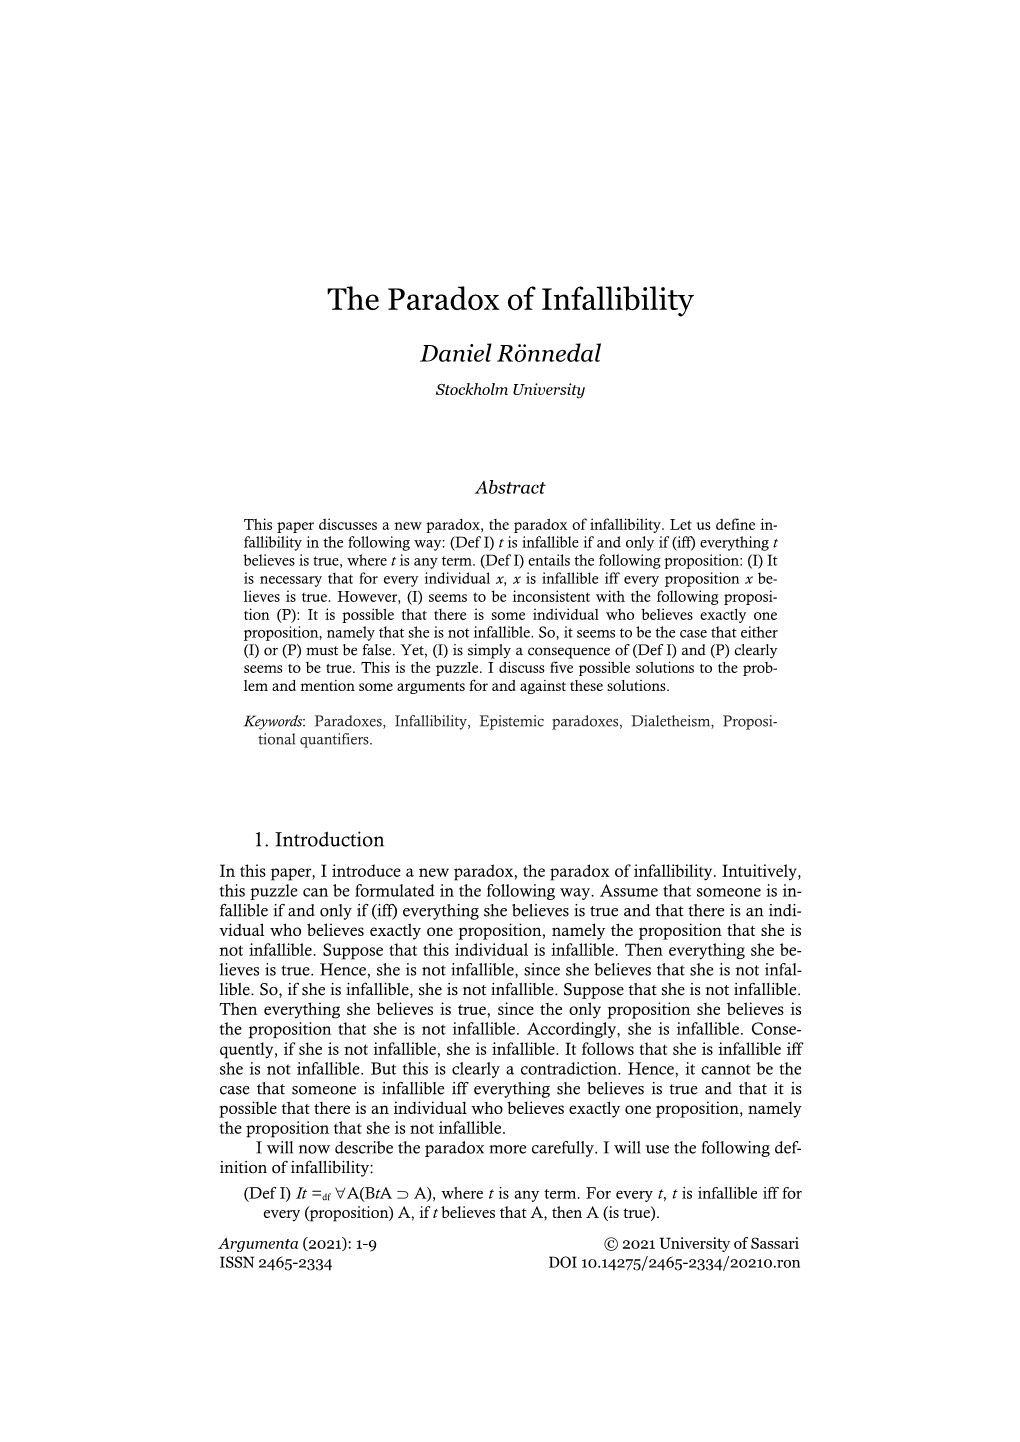 The Paradox of Infallibility